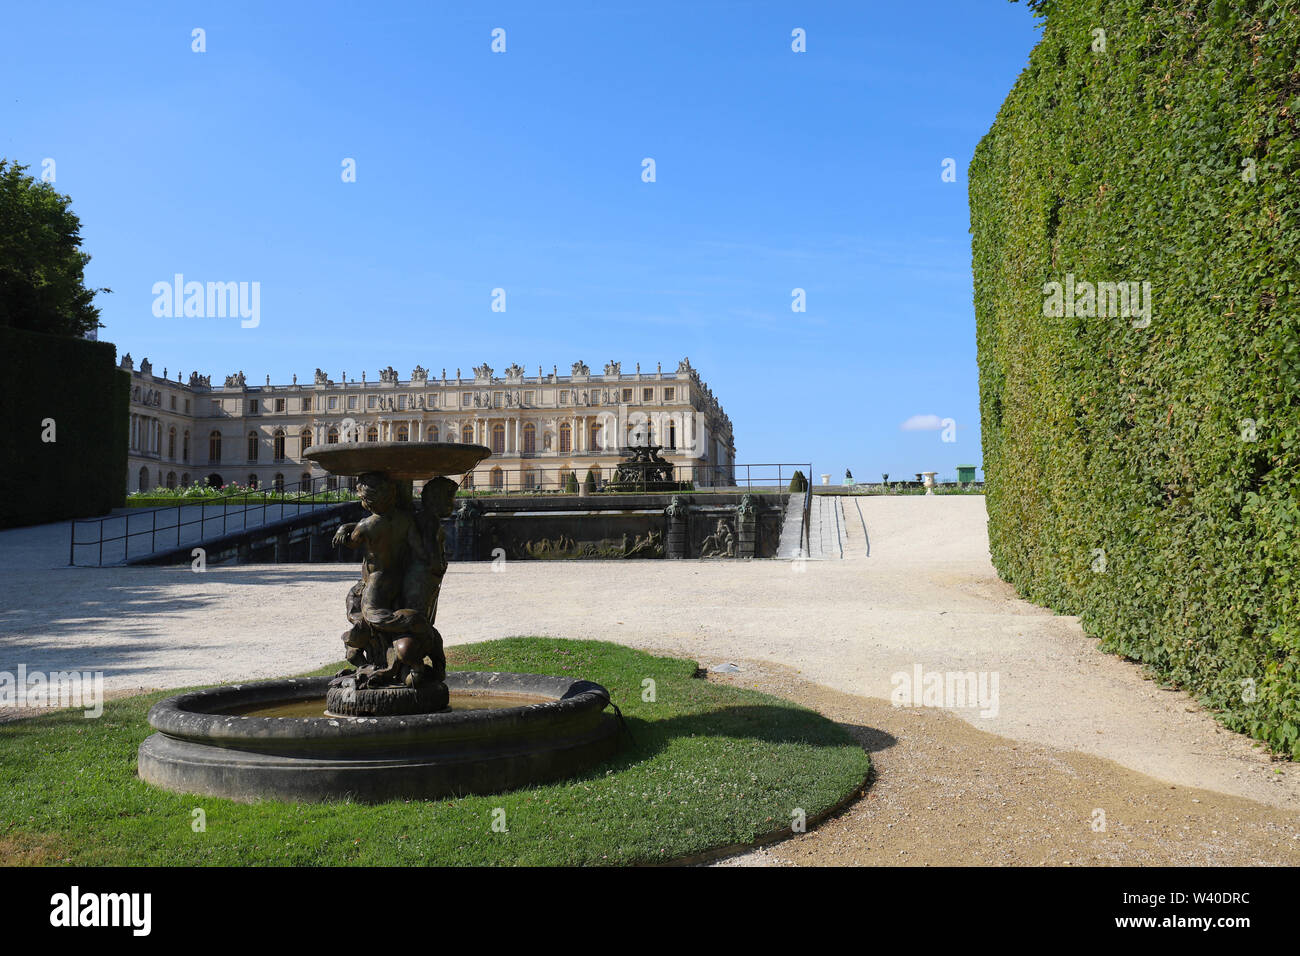 Outside view of Famous palace Versailles. The Palace Versailles was a royal castle. Stock Photo